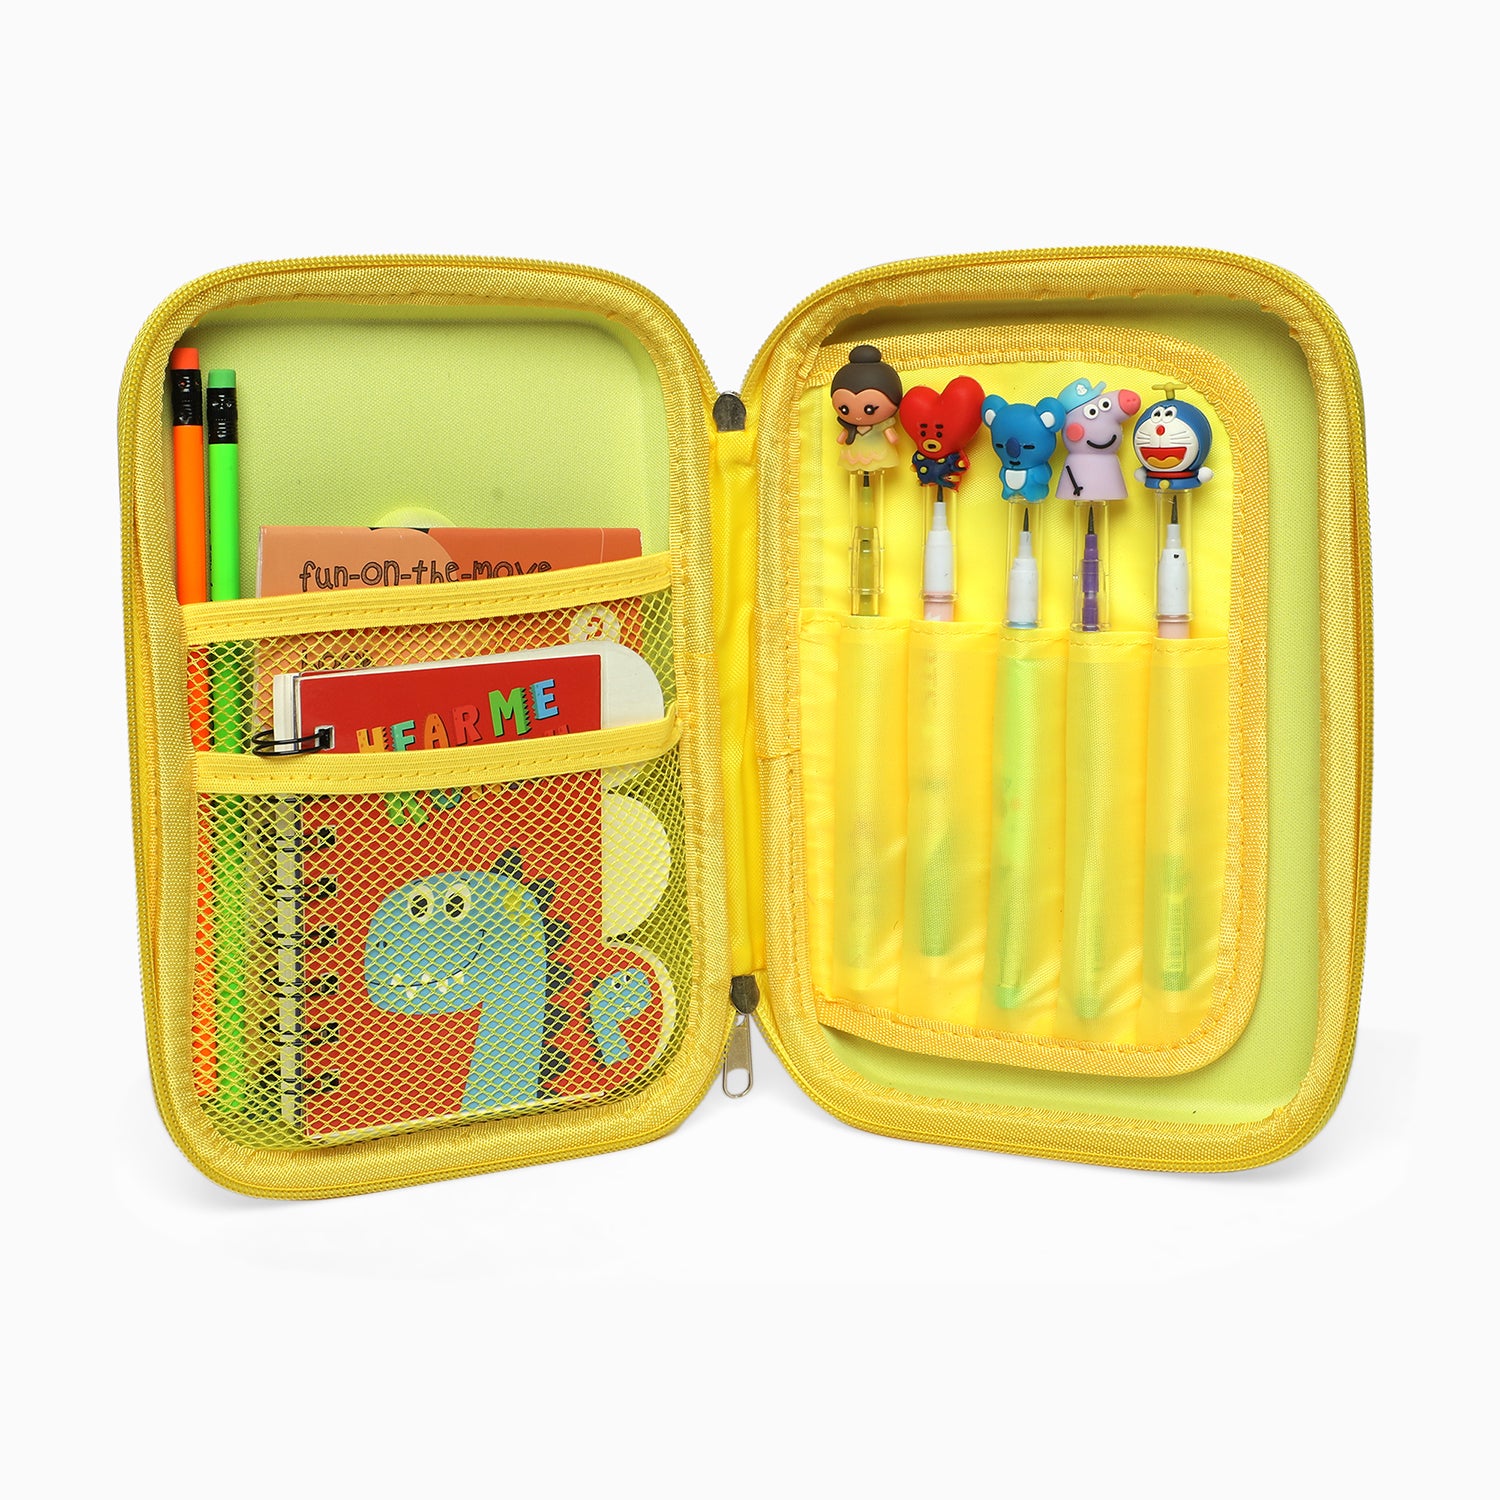 ZORSE Rectangle Shaped Hard Case calculator pencil Pouch (yellow)